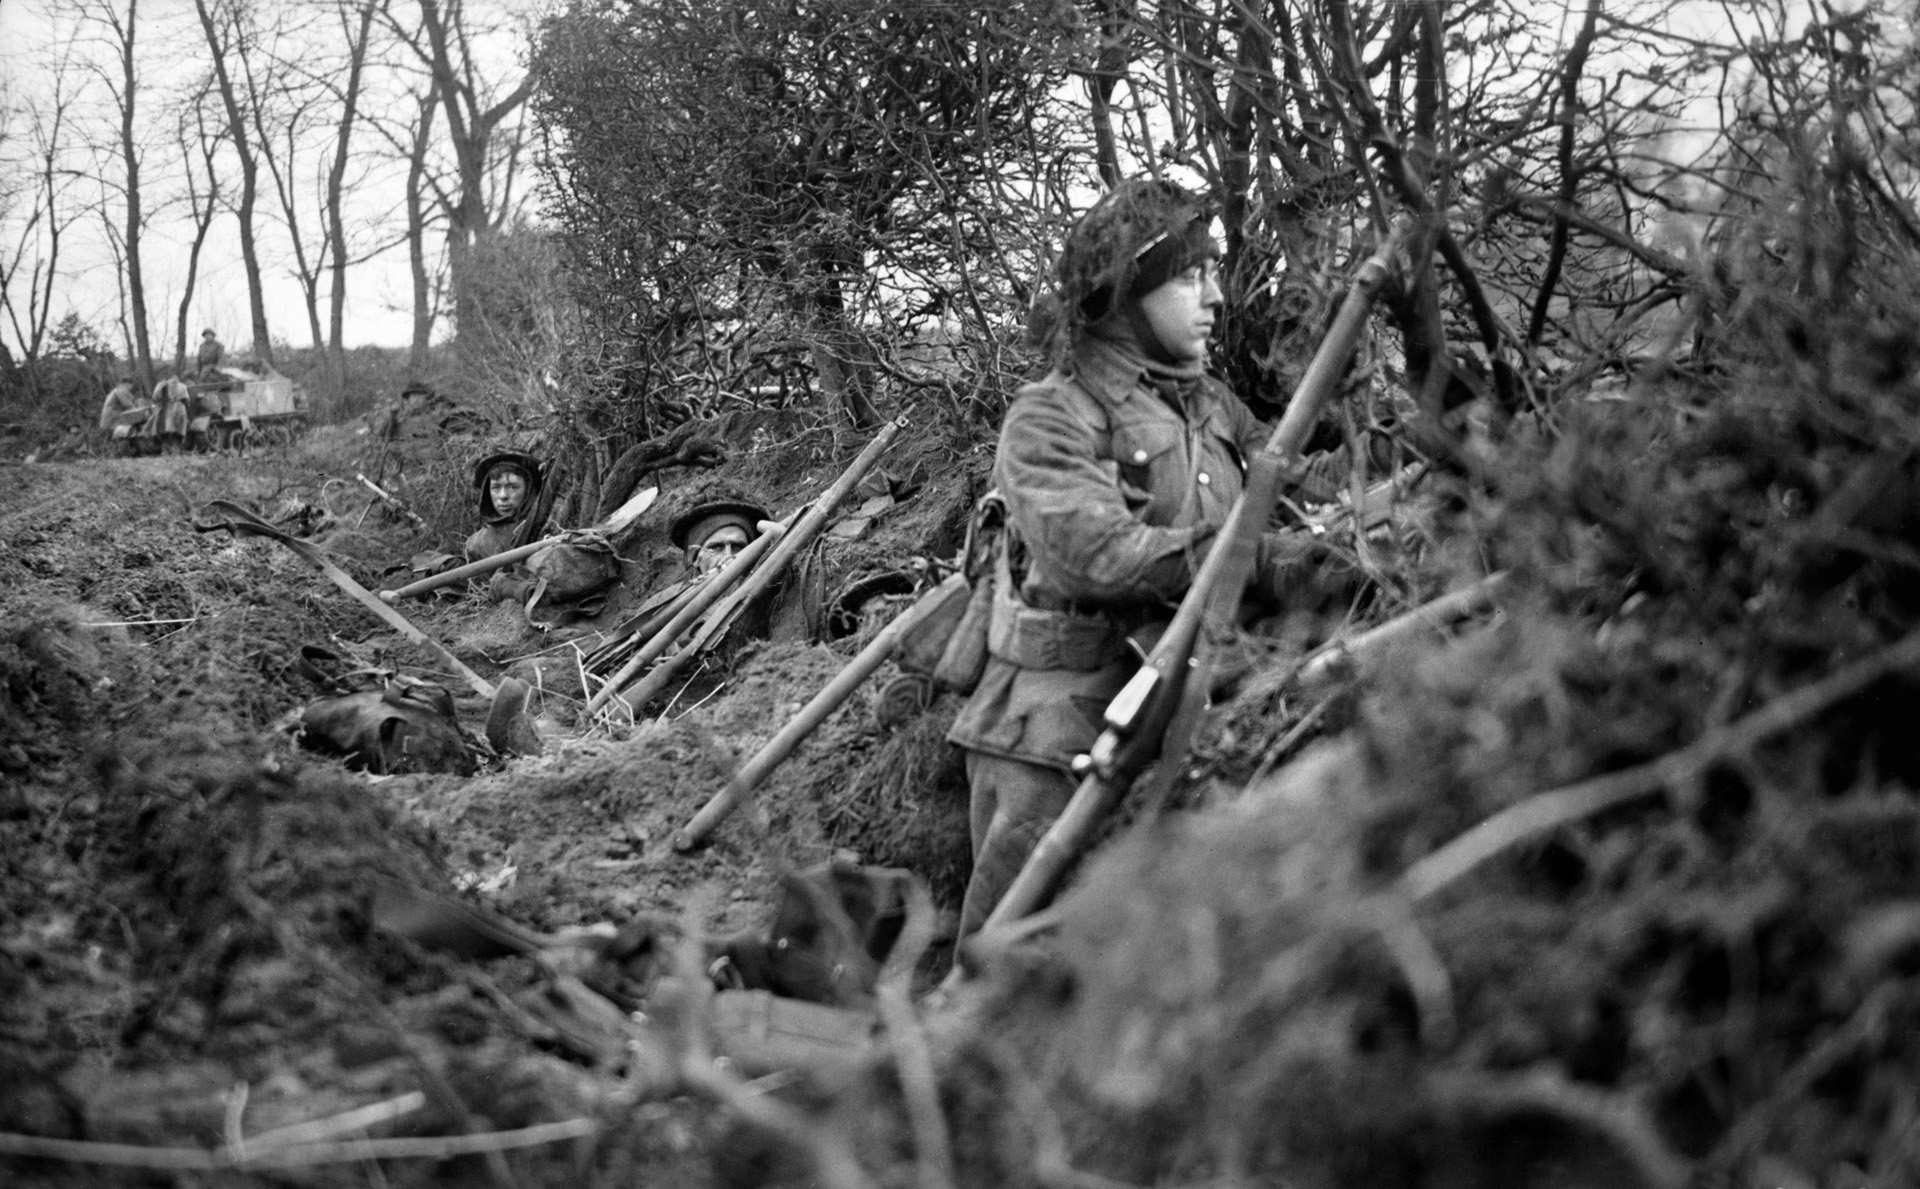 Combat veterans of the 2nd Argyll and Sutherland Highlanders, 15th Scottish Division take temporary shelter along an embankment in the Reichswald.